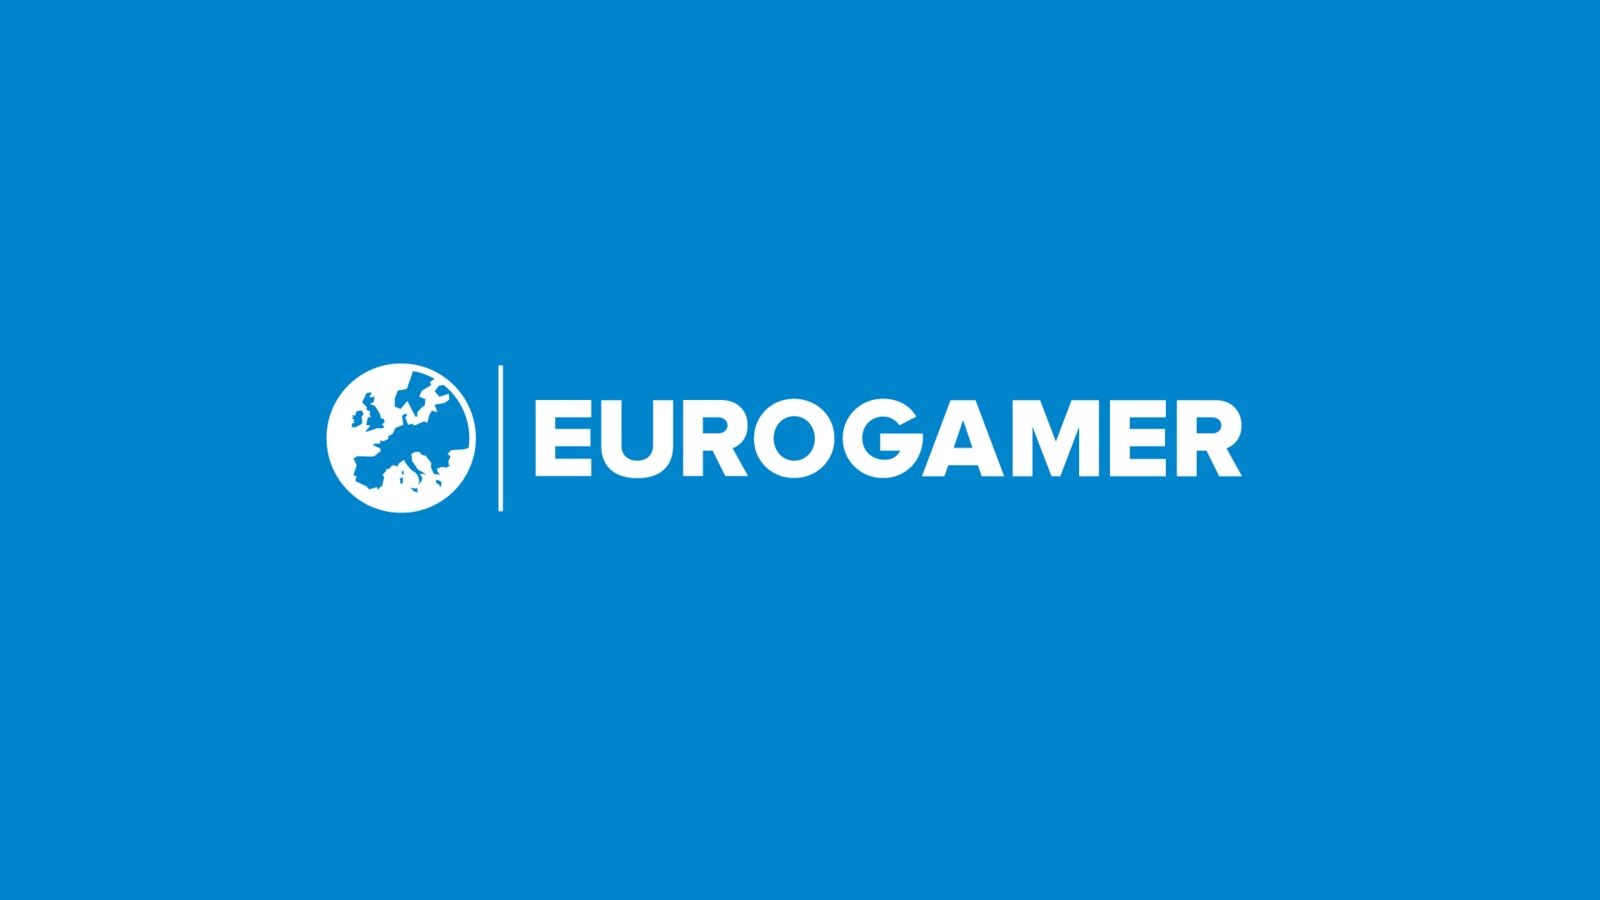 Eurogamer's fresh line of fits is ready for your Xmas stocking